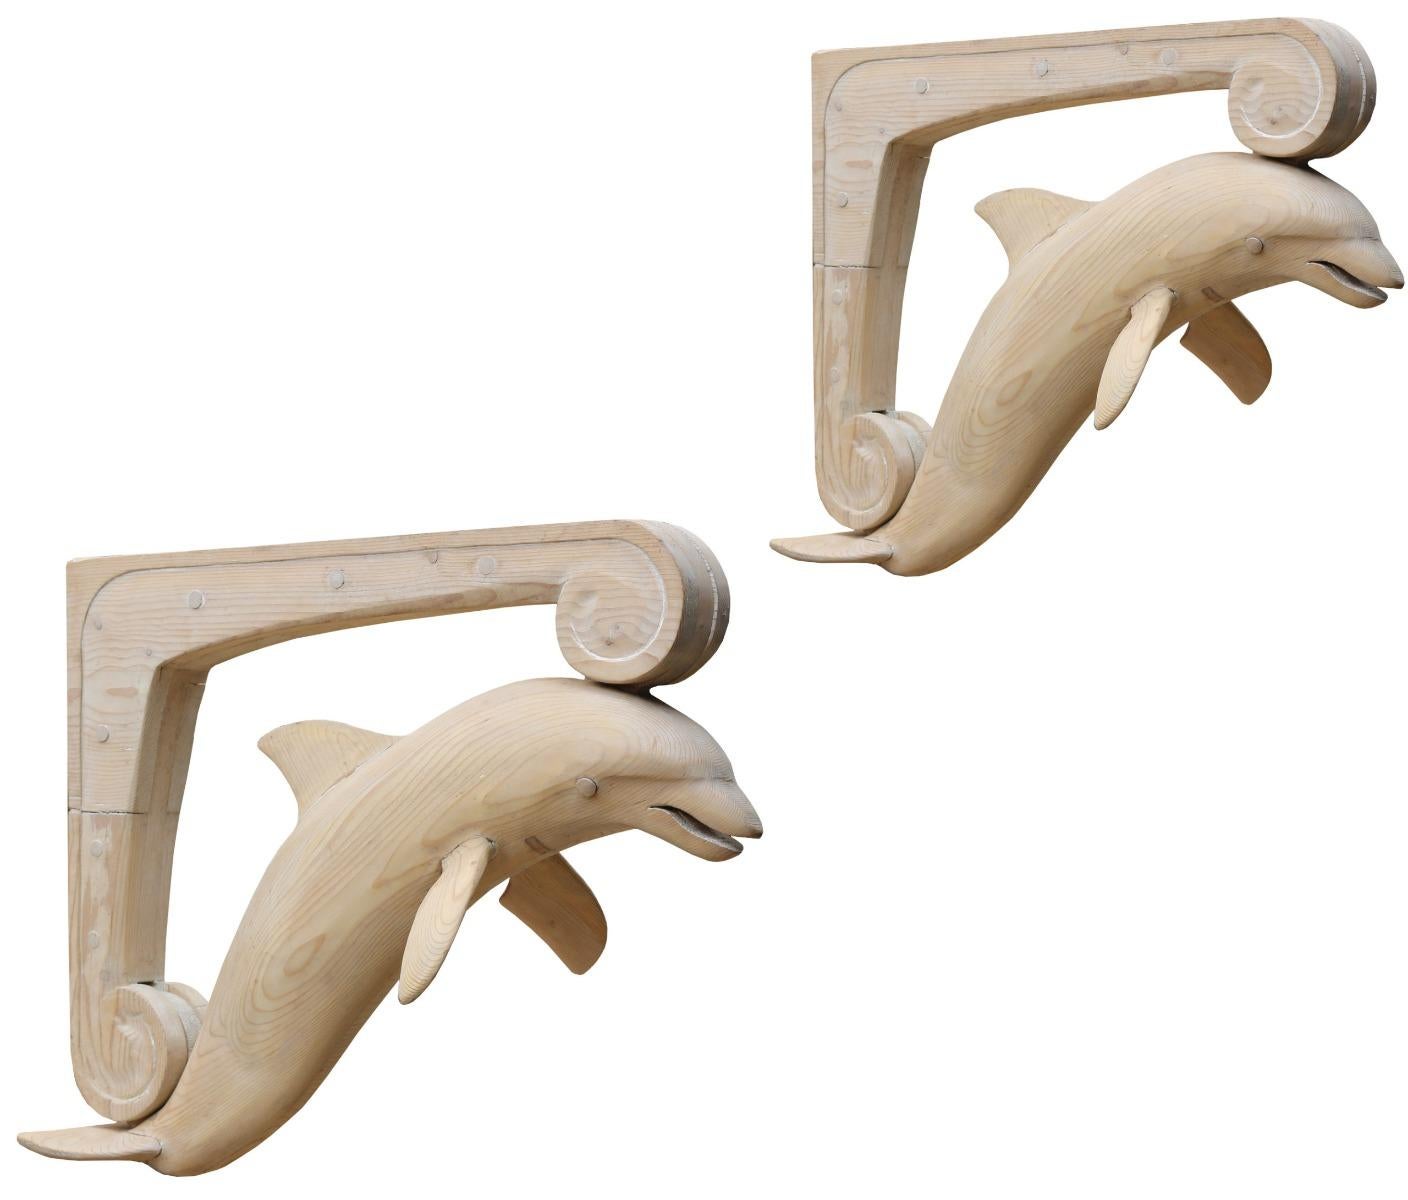 A stunning pair of dolphins carved in pine on a scroll bracket. These were originally porch supports, but could be put to many other decorative uses.